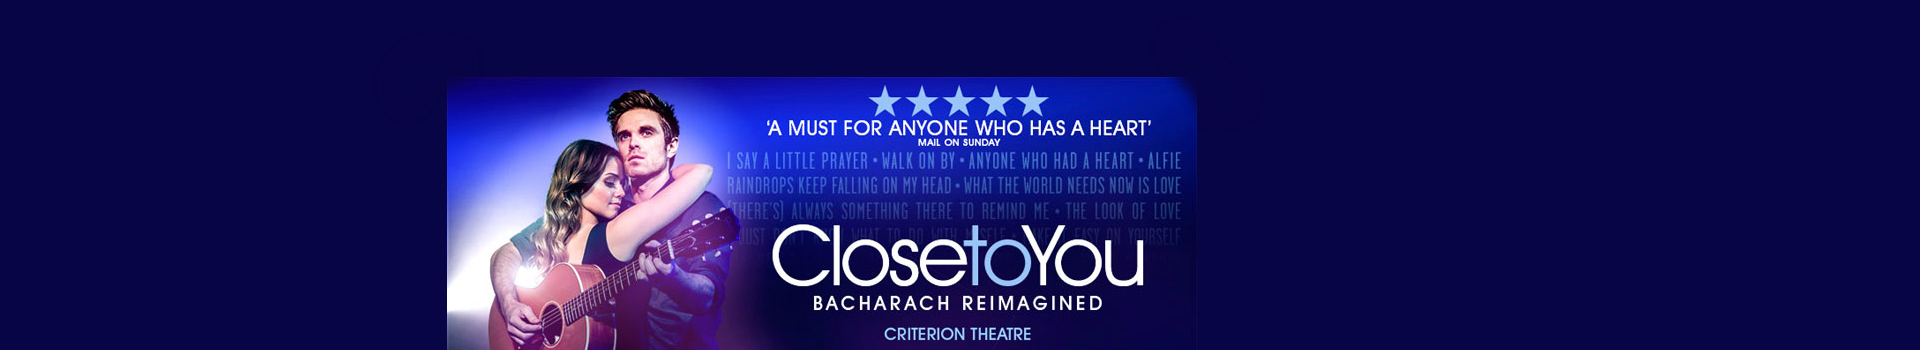 Close To You: Bacharach Reimagined tickets London Criterion Theatre